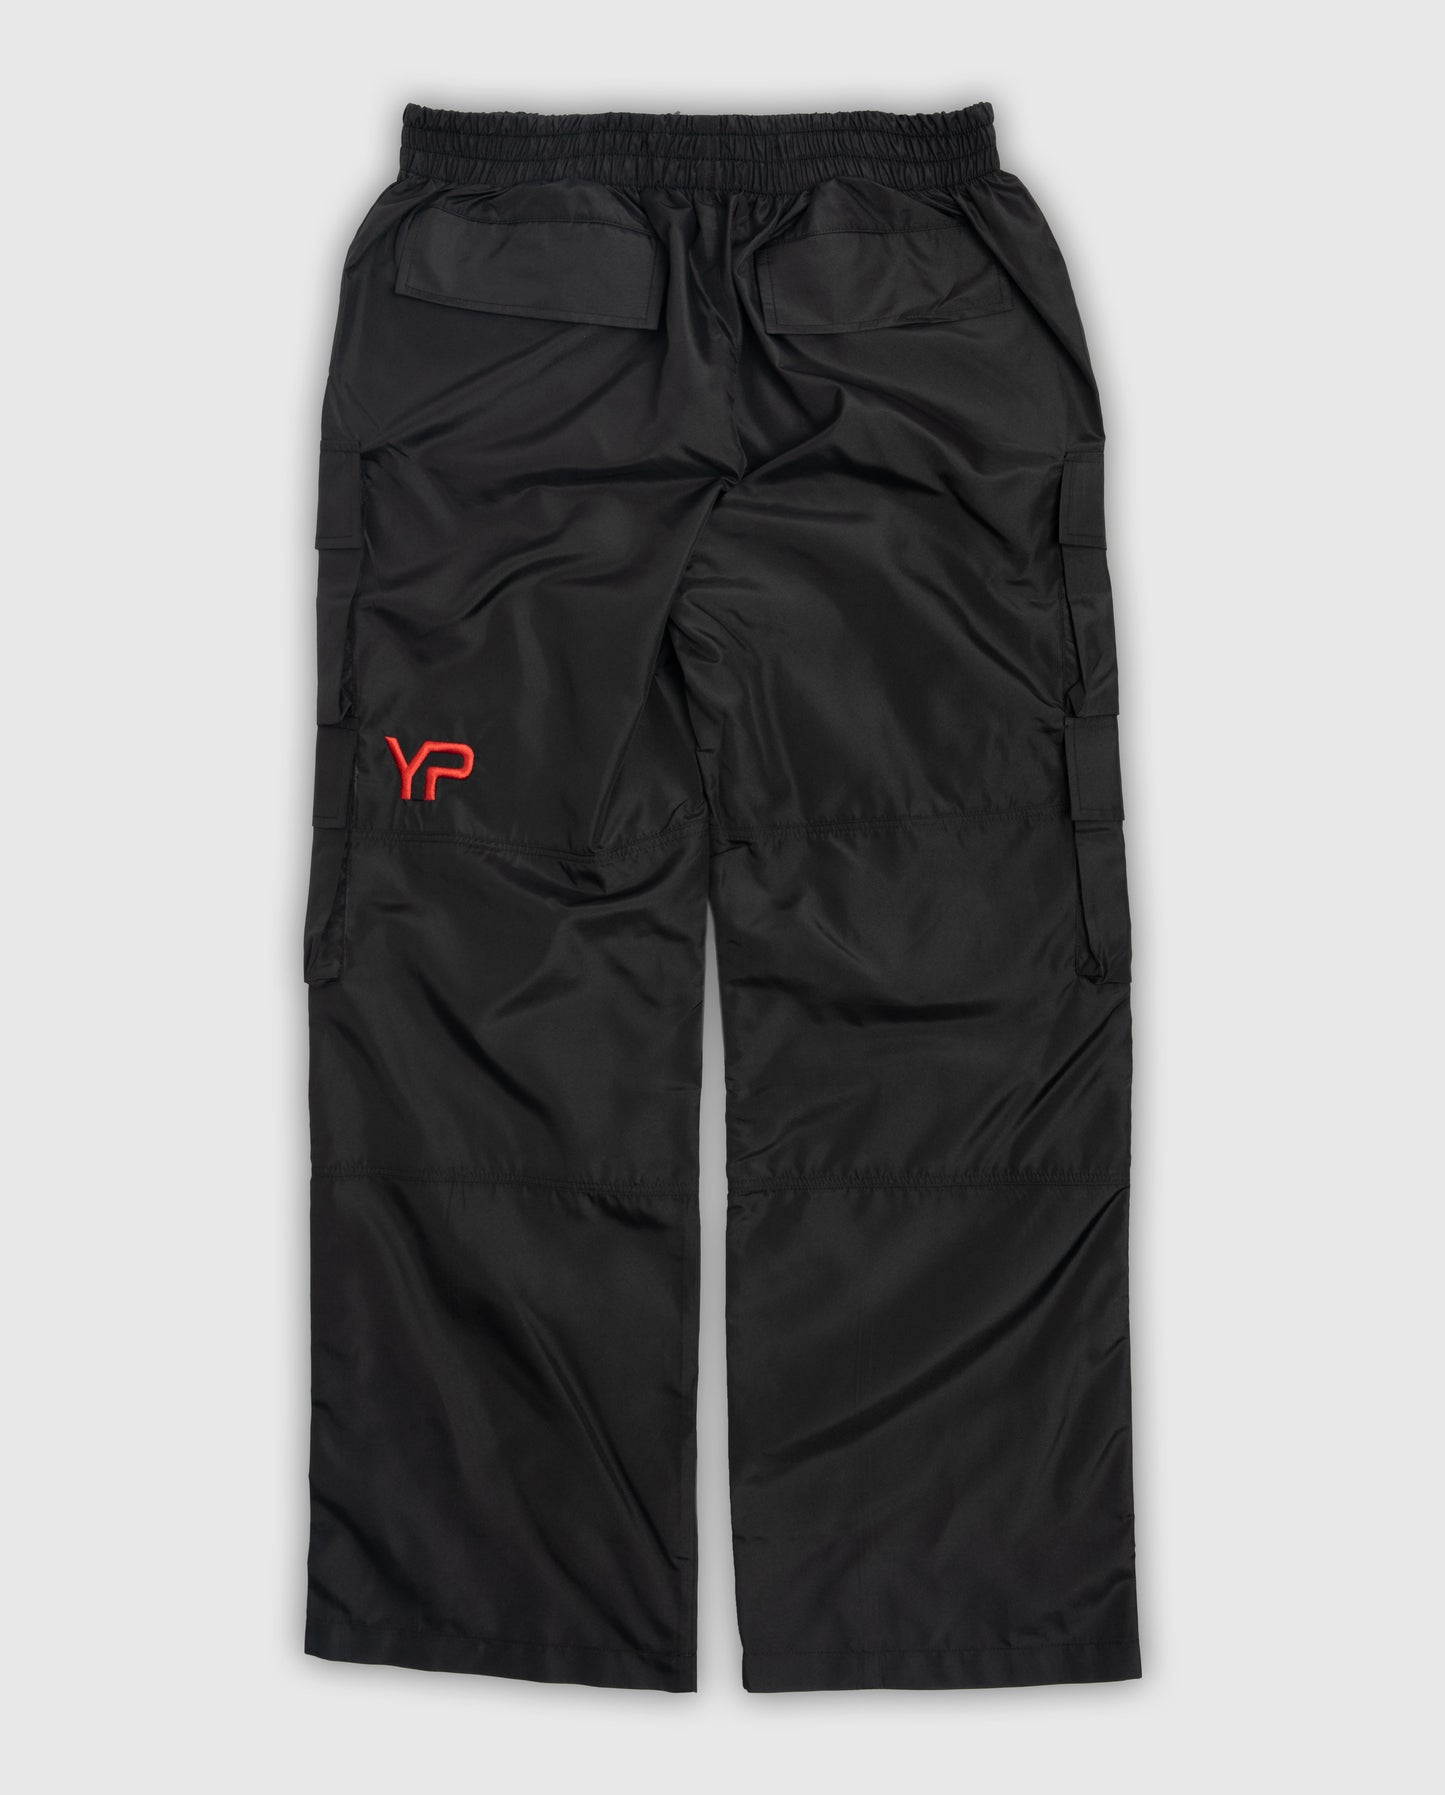 YP OVERSIZE STACKED BLACK TRACKPANTS